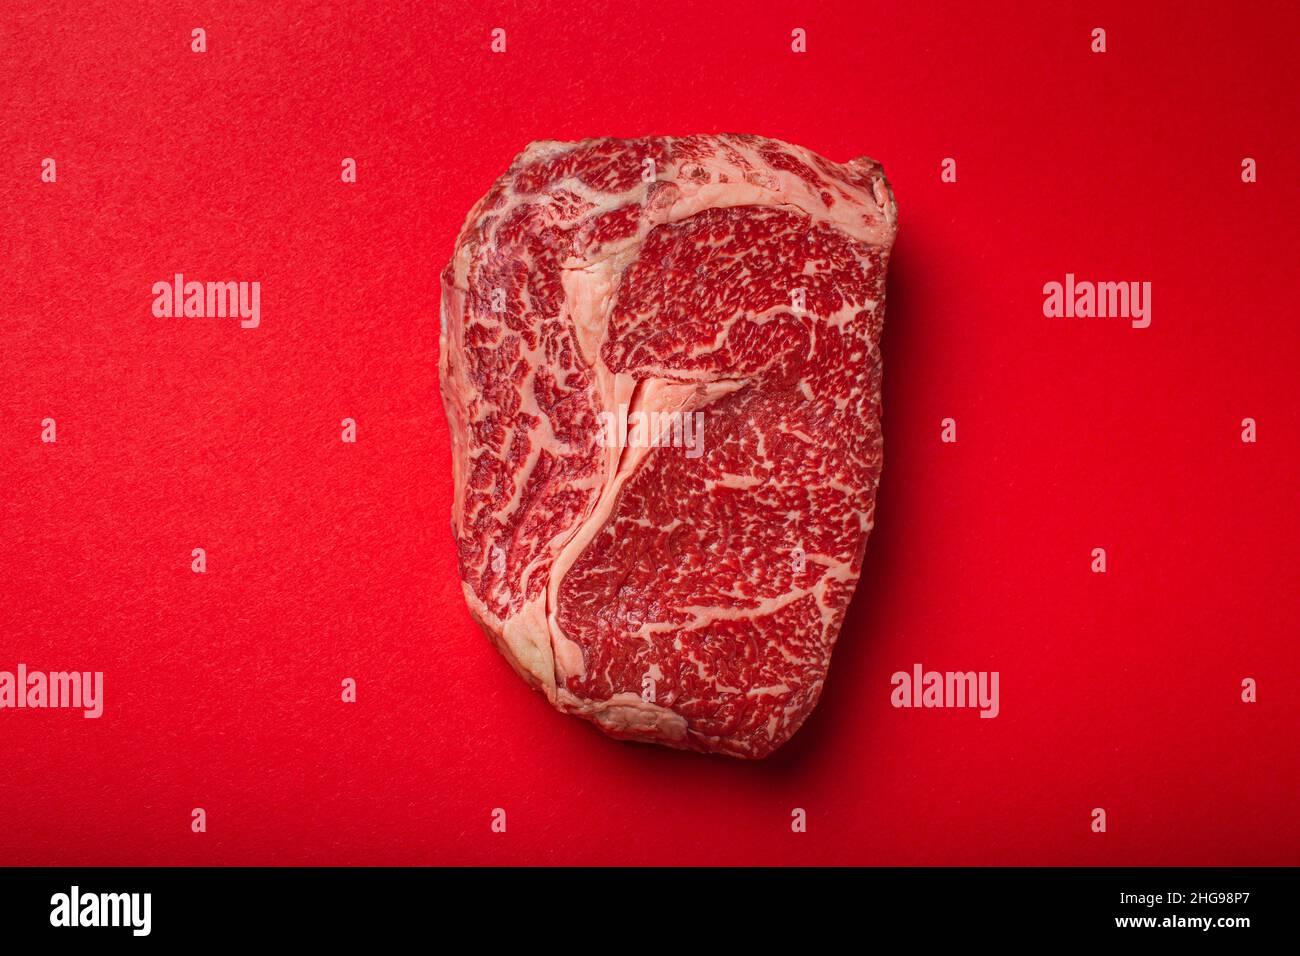 Raw meat beef prime cut steak Ribeye on clean red background from above, beefsteak concept banner minimalism Stock Photo